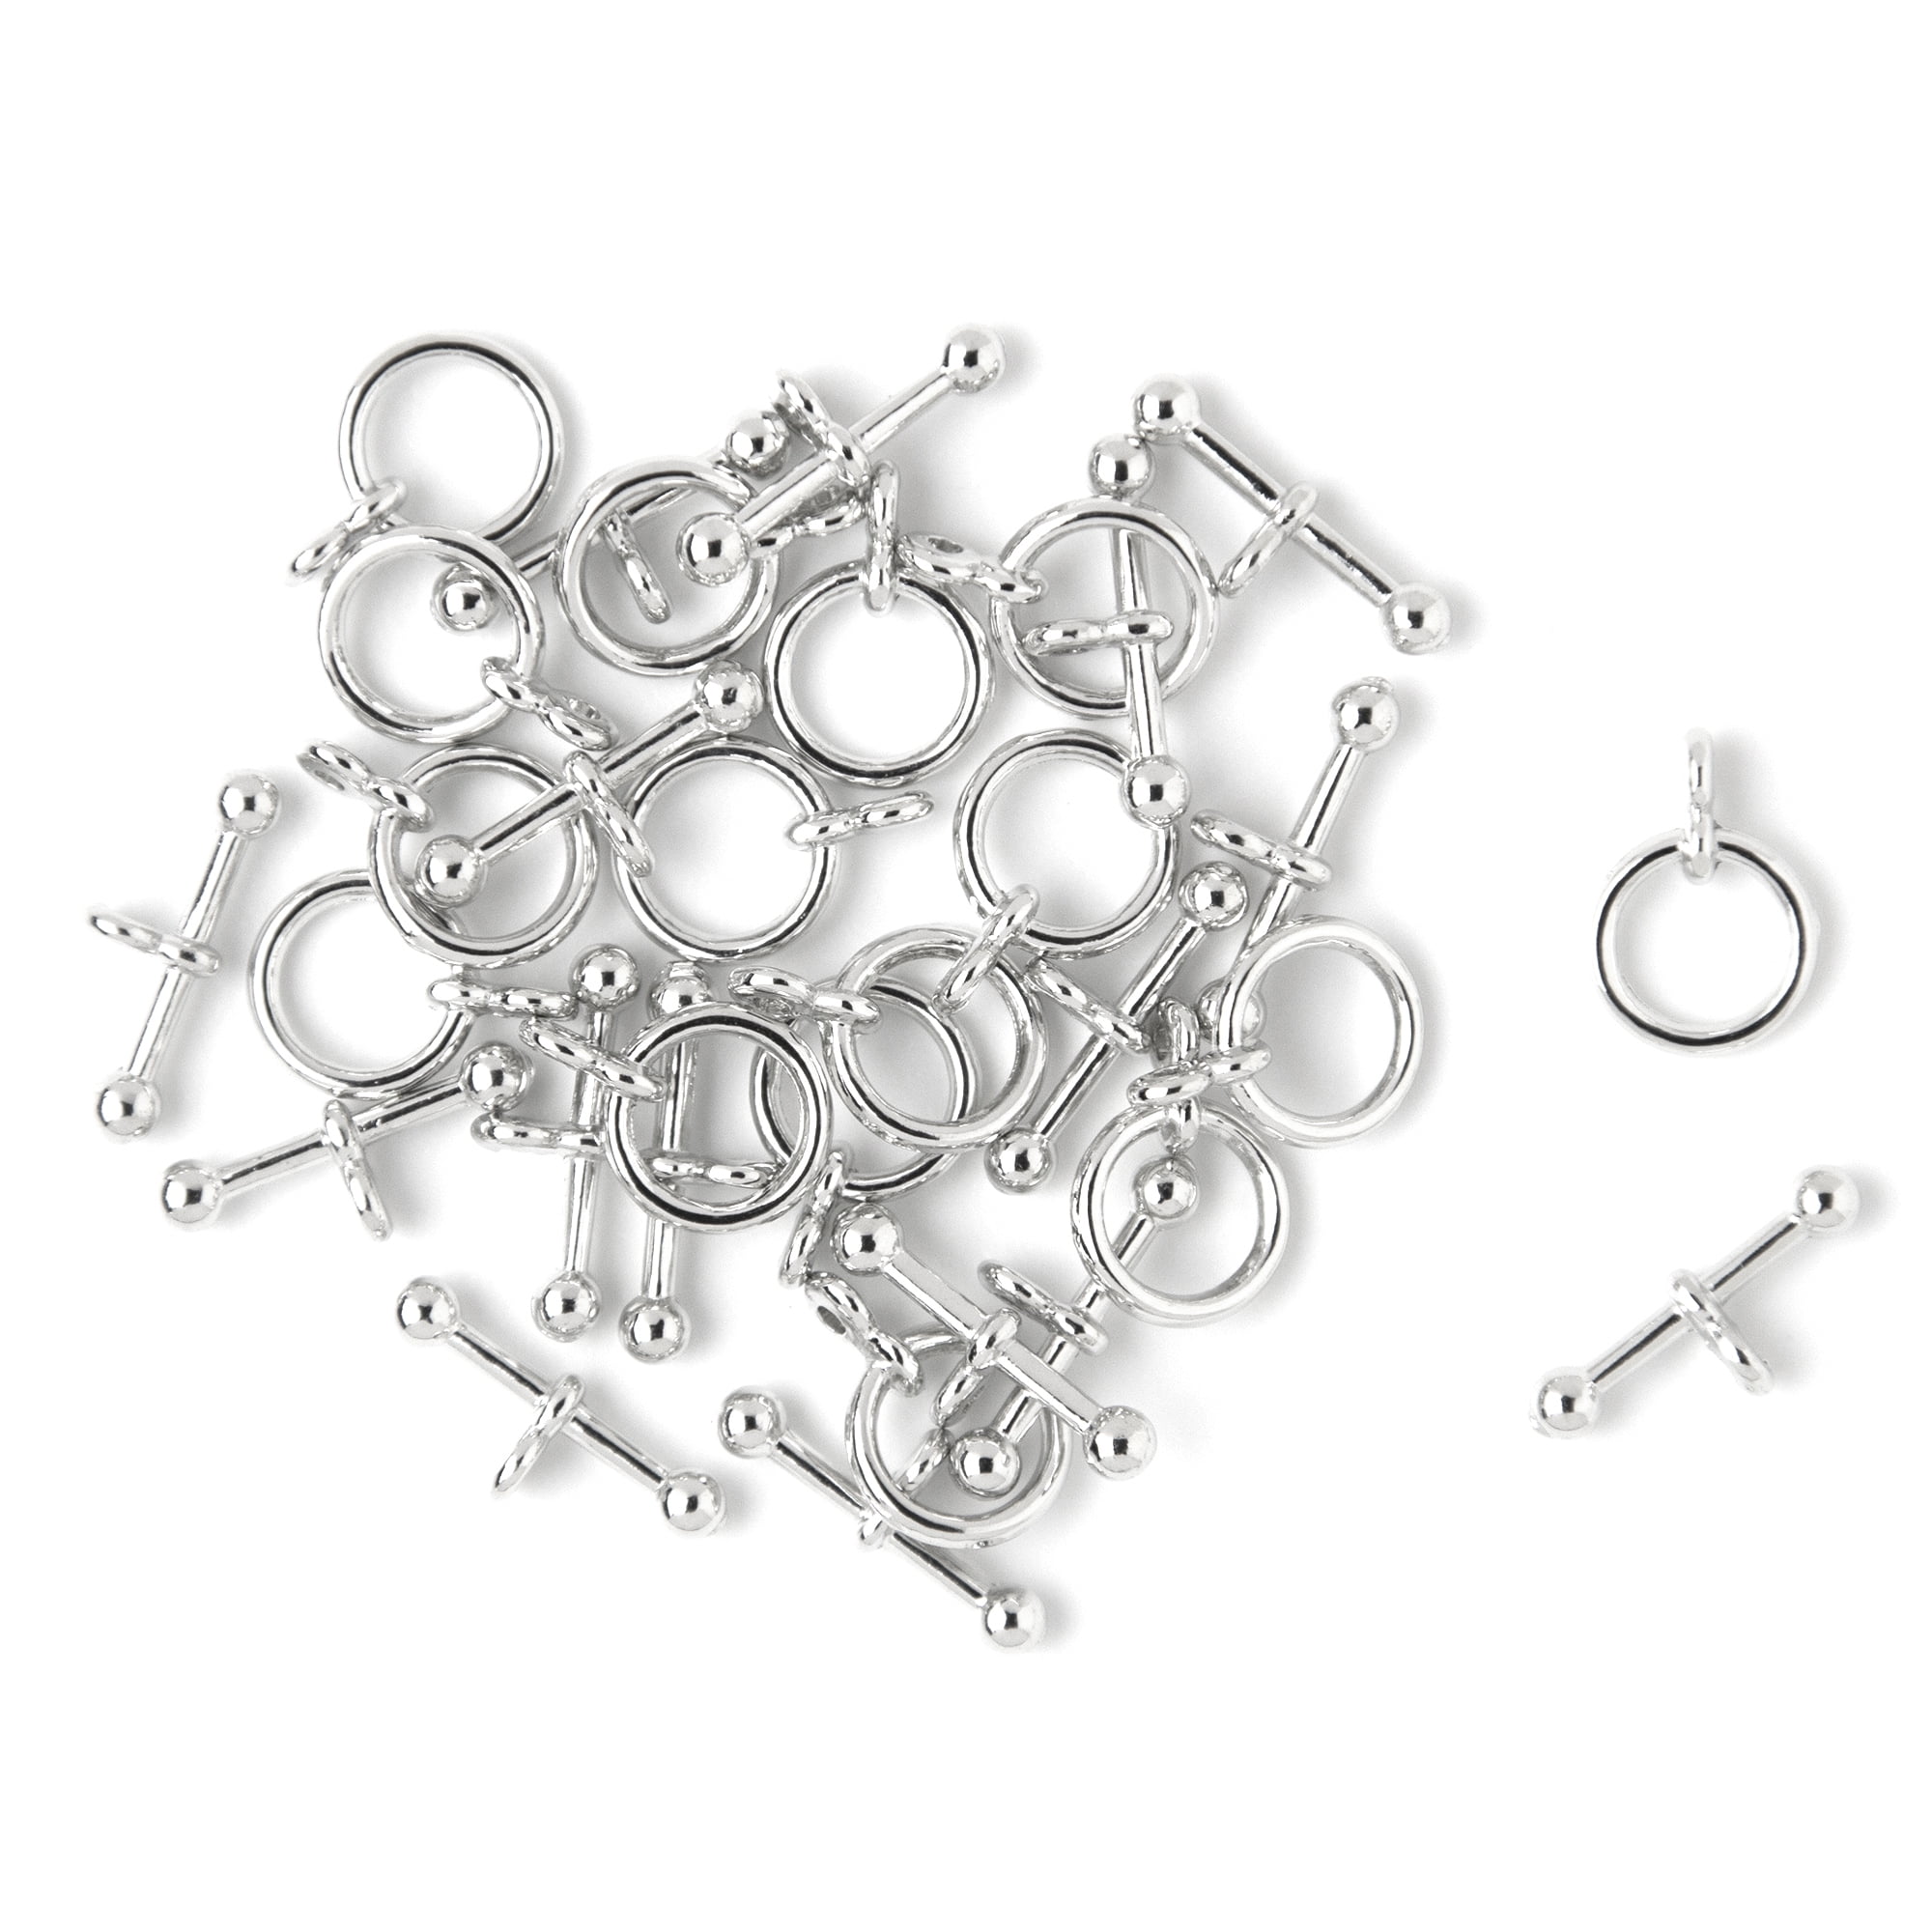 10 pcs Silver tone flower toggle clasps jewellery making findings